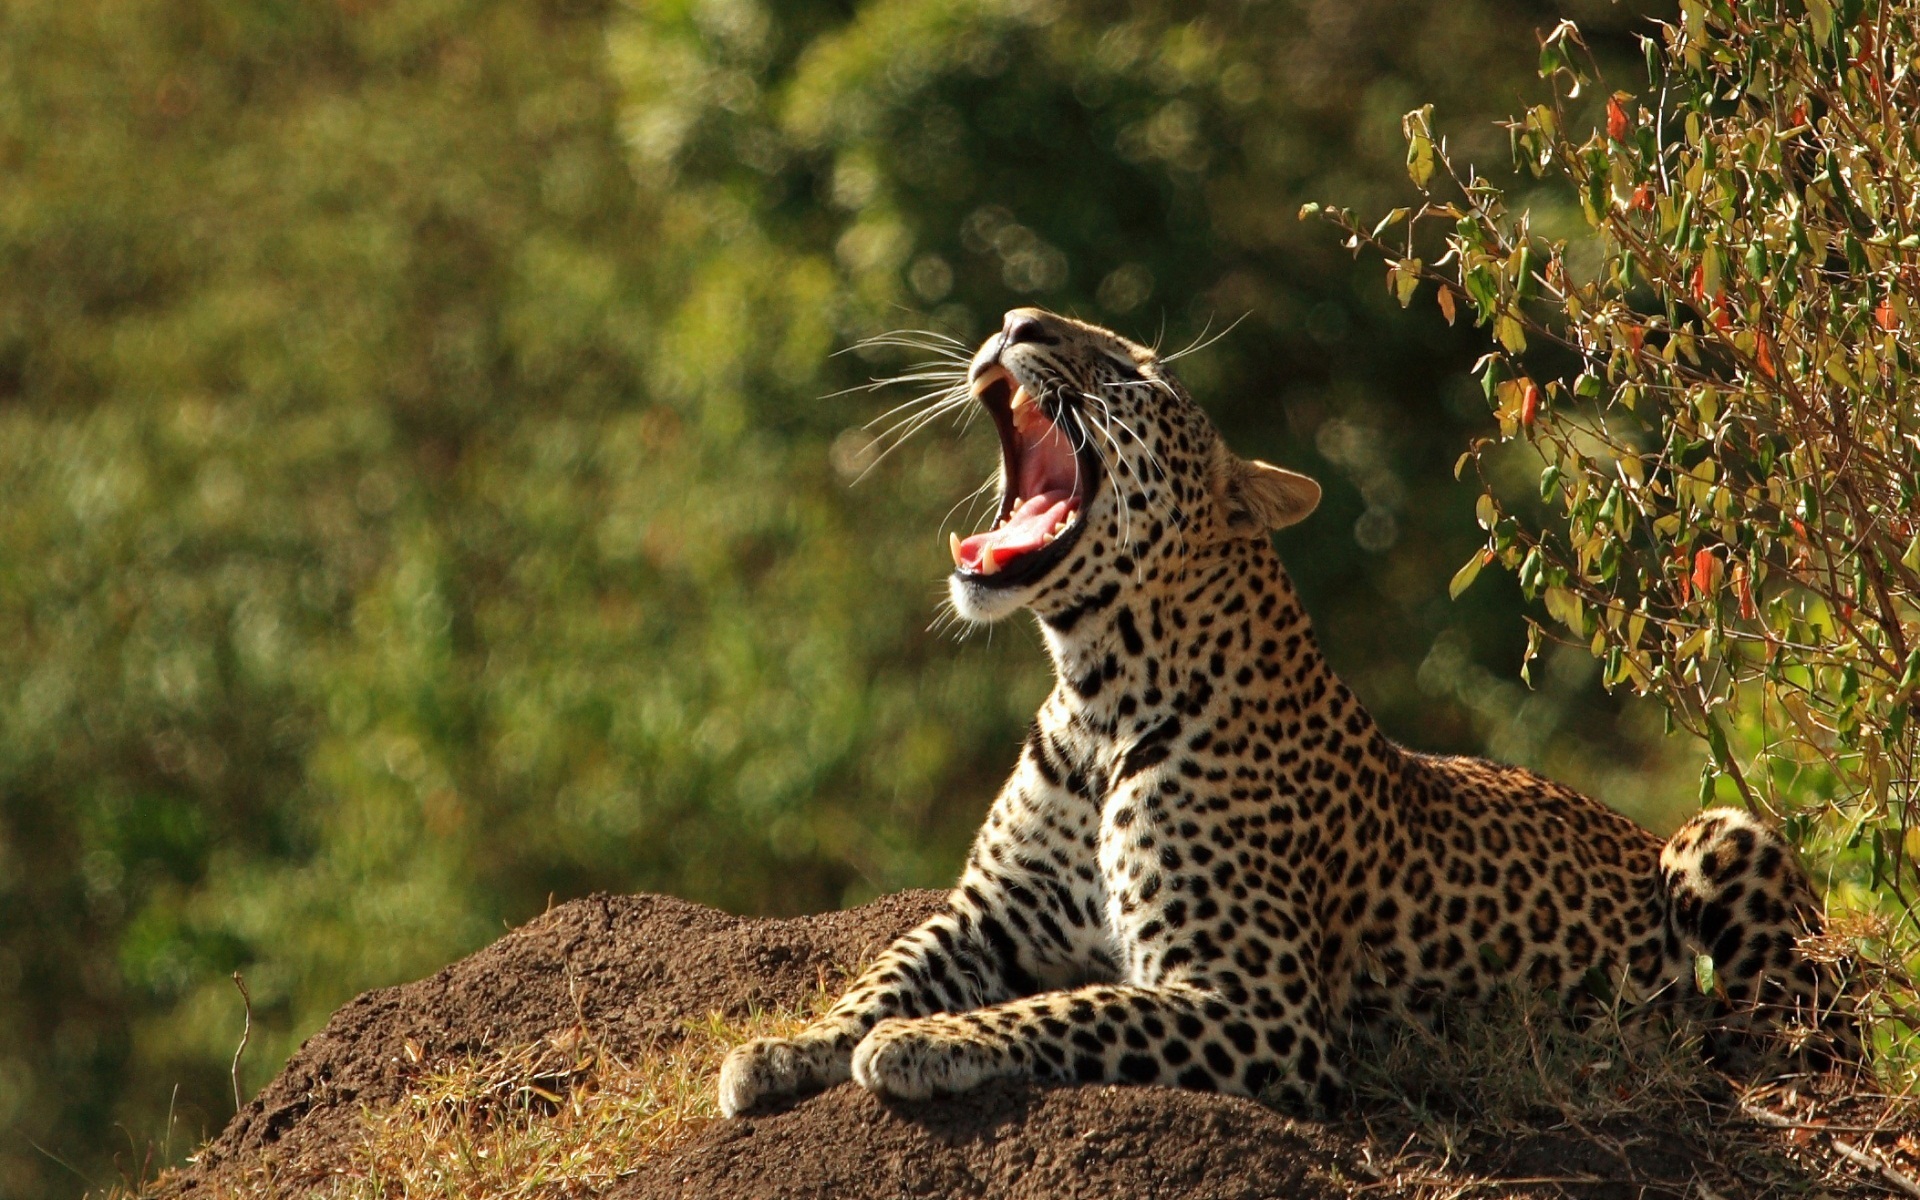 Leopard is yawning